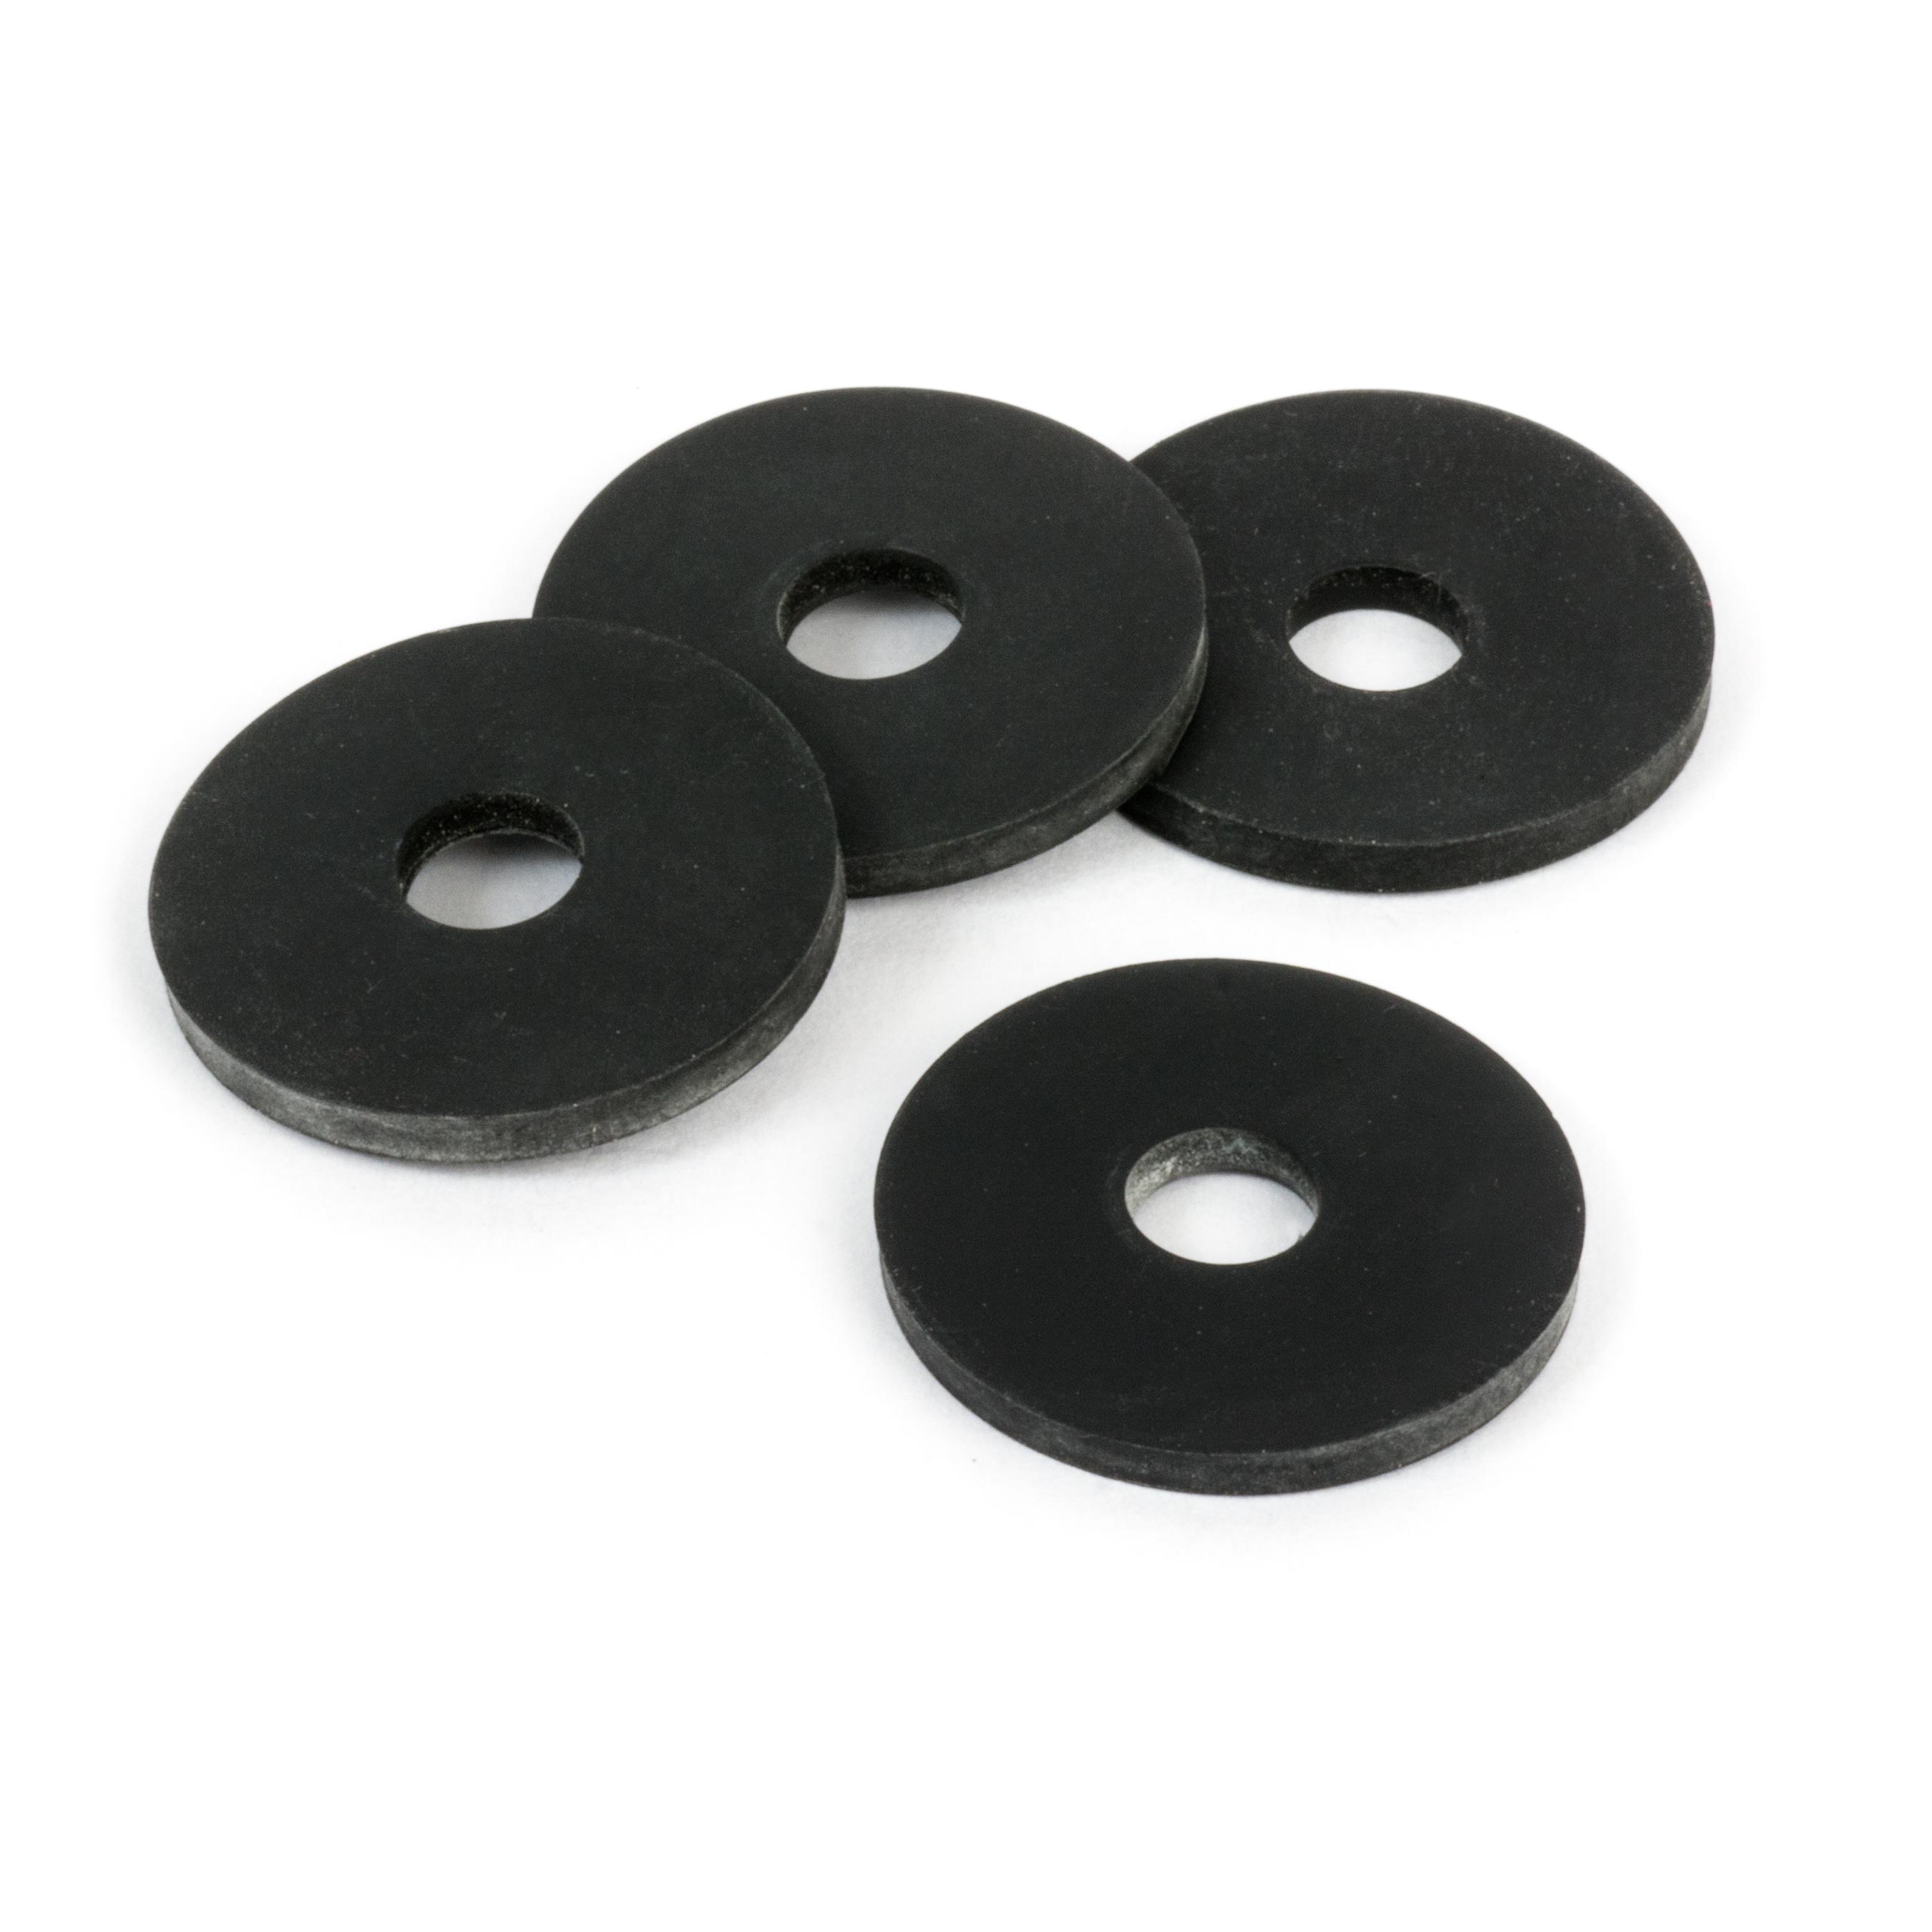 Strap Stoppers - 4 Pack